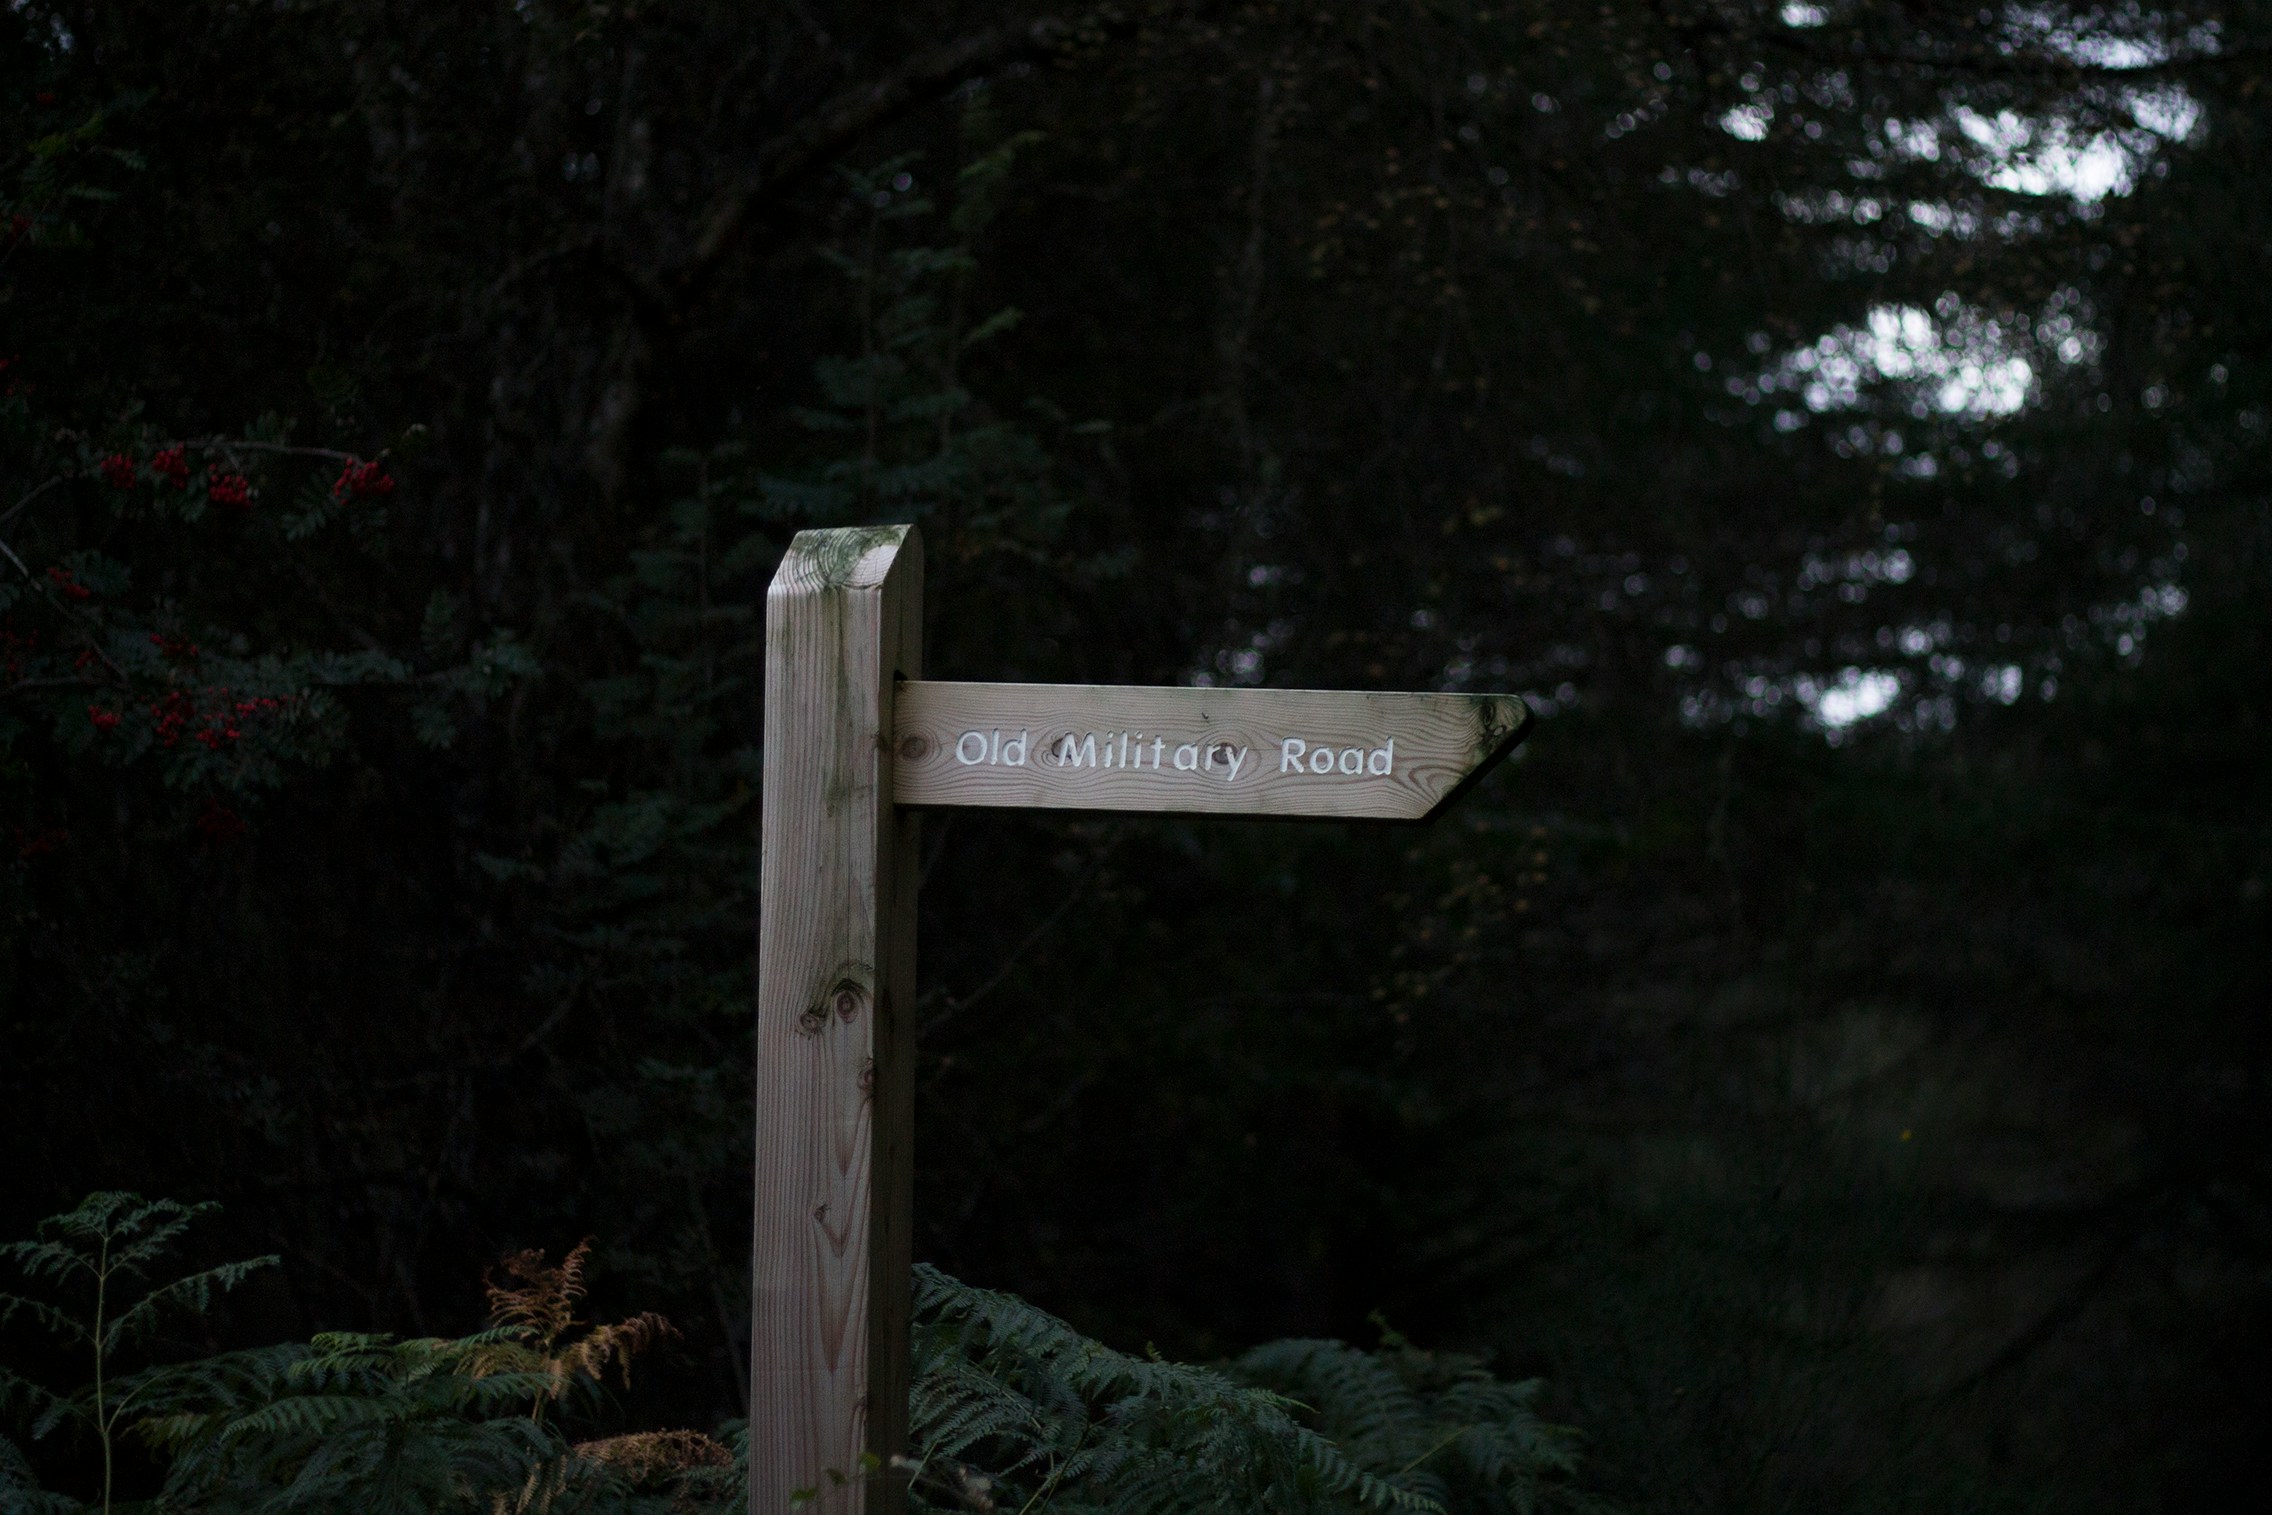 a wooden sign pointing to the left in front of some trees